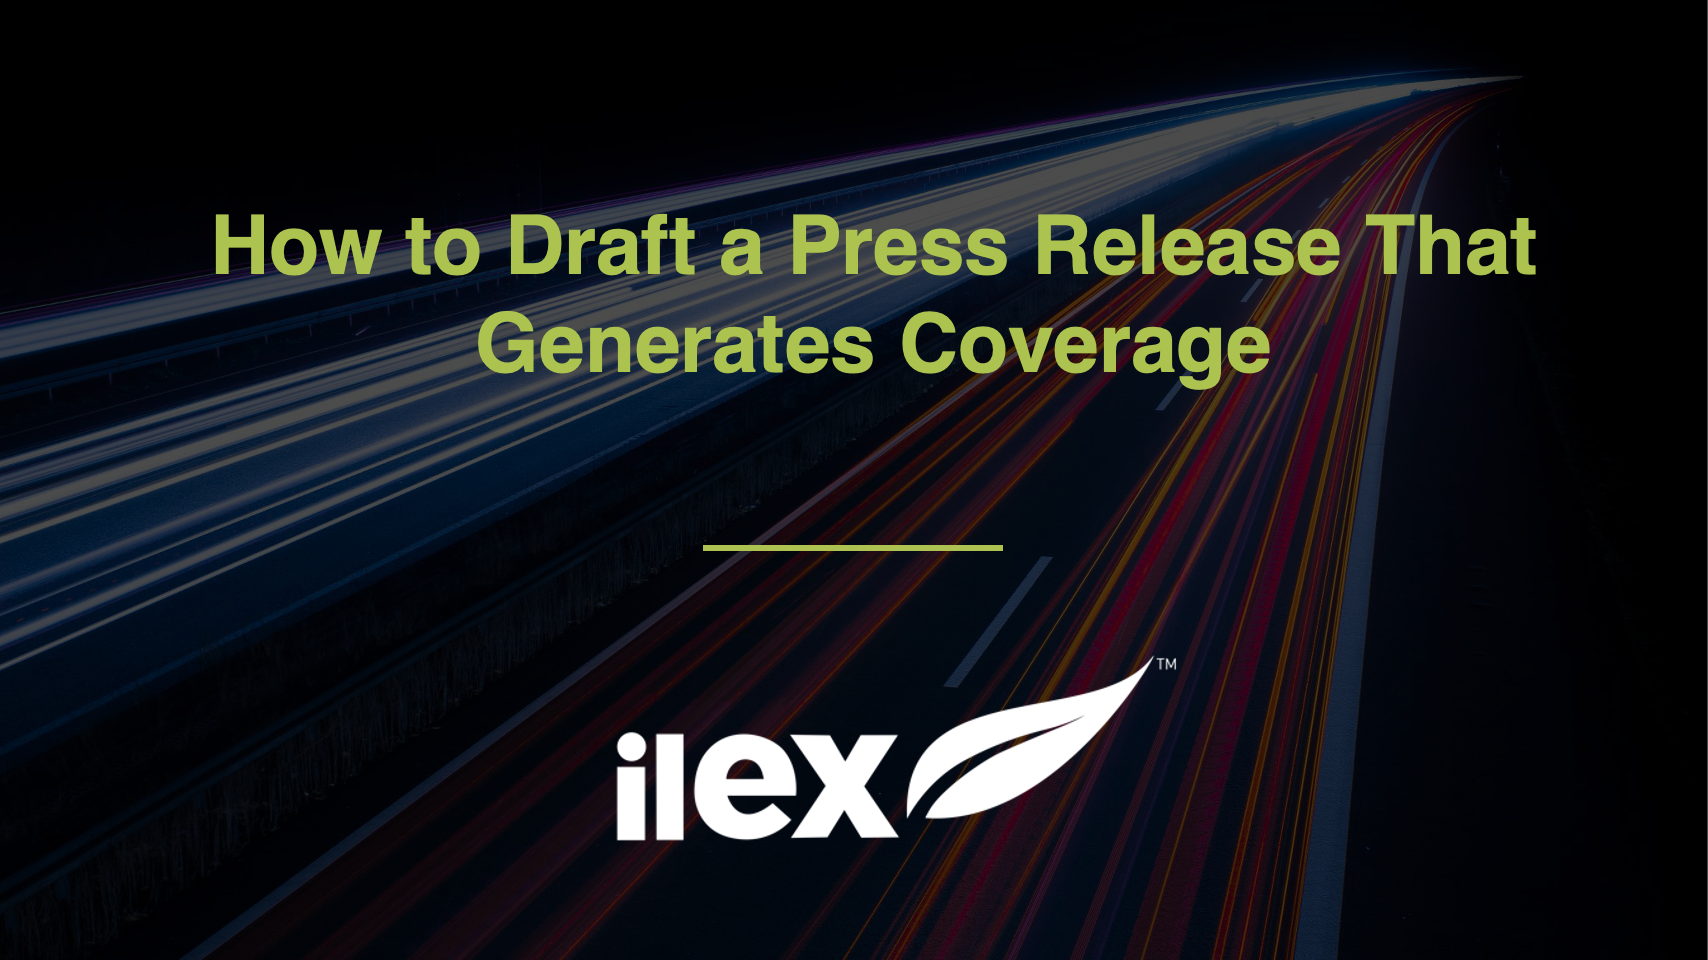 How to Draft a Press Release That Generates Coverage